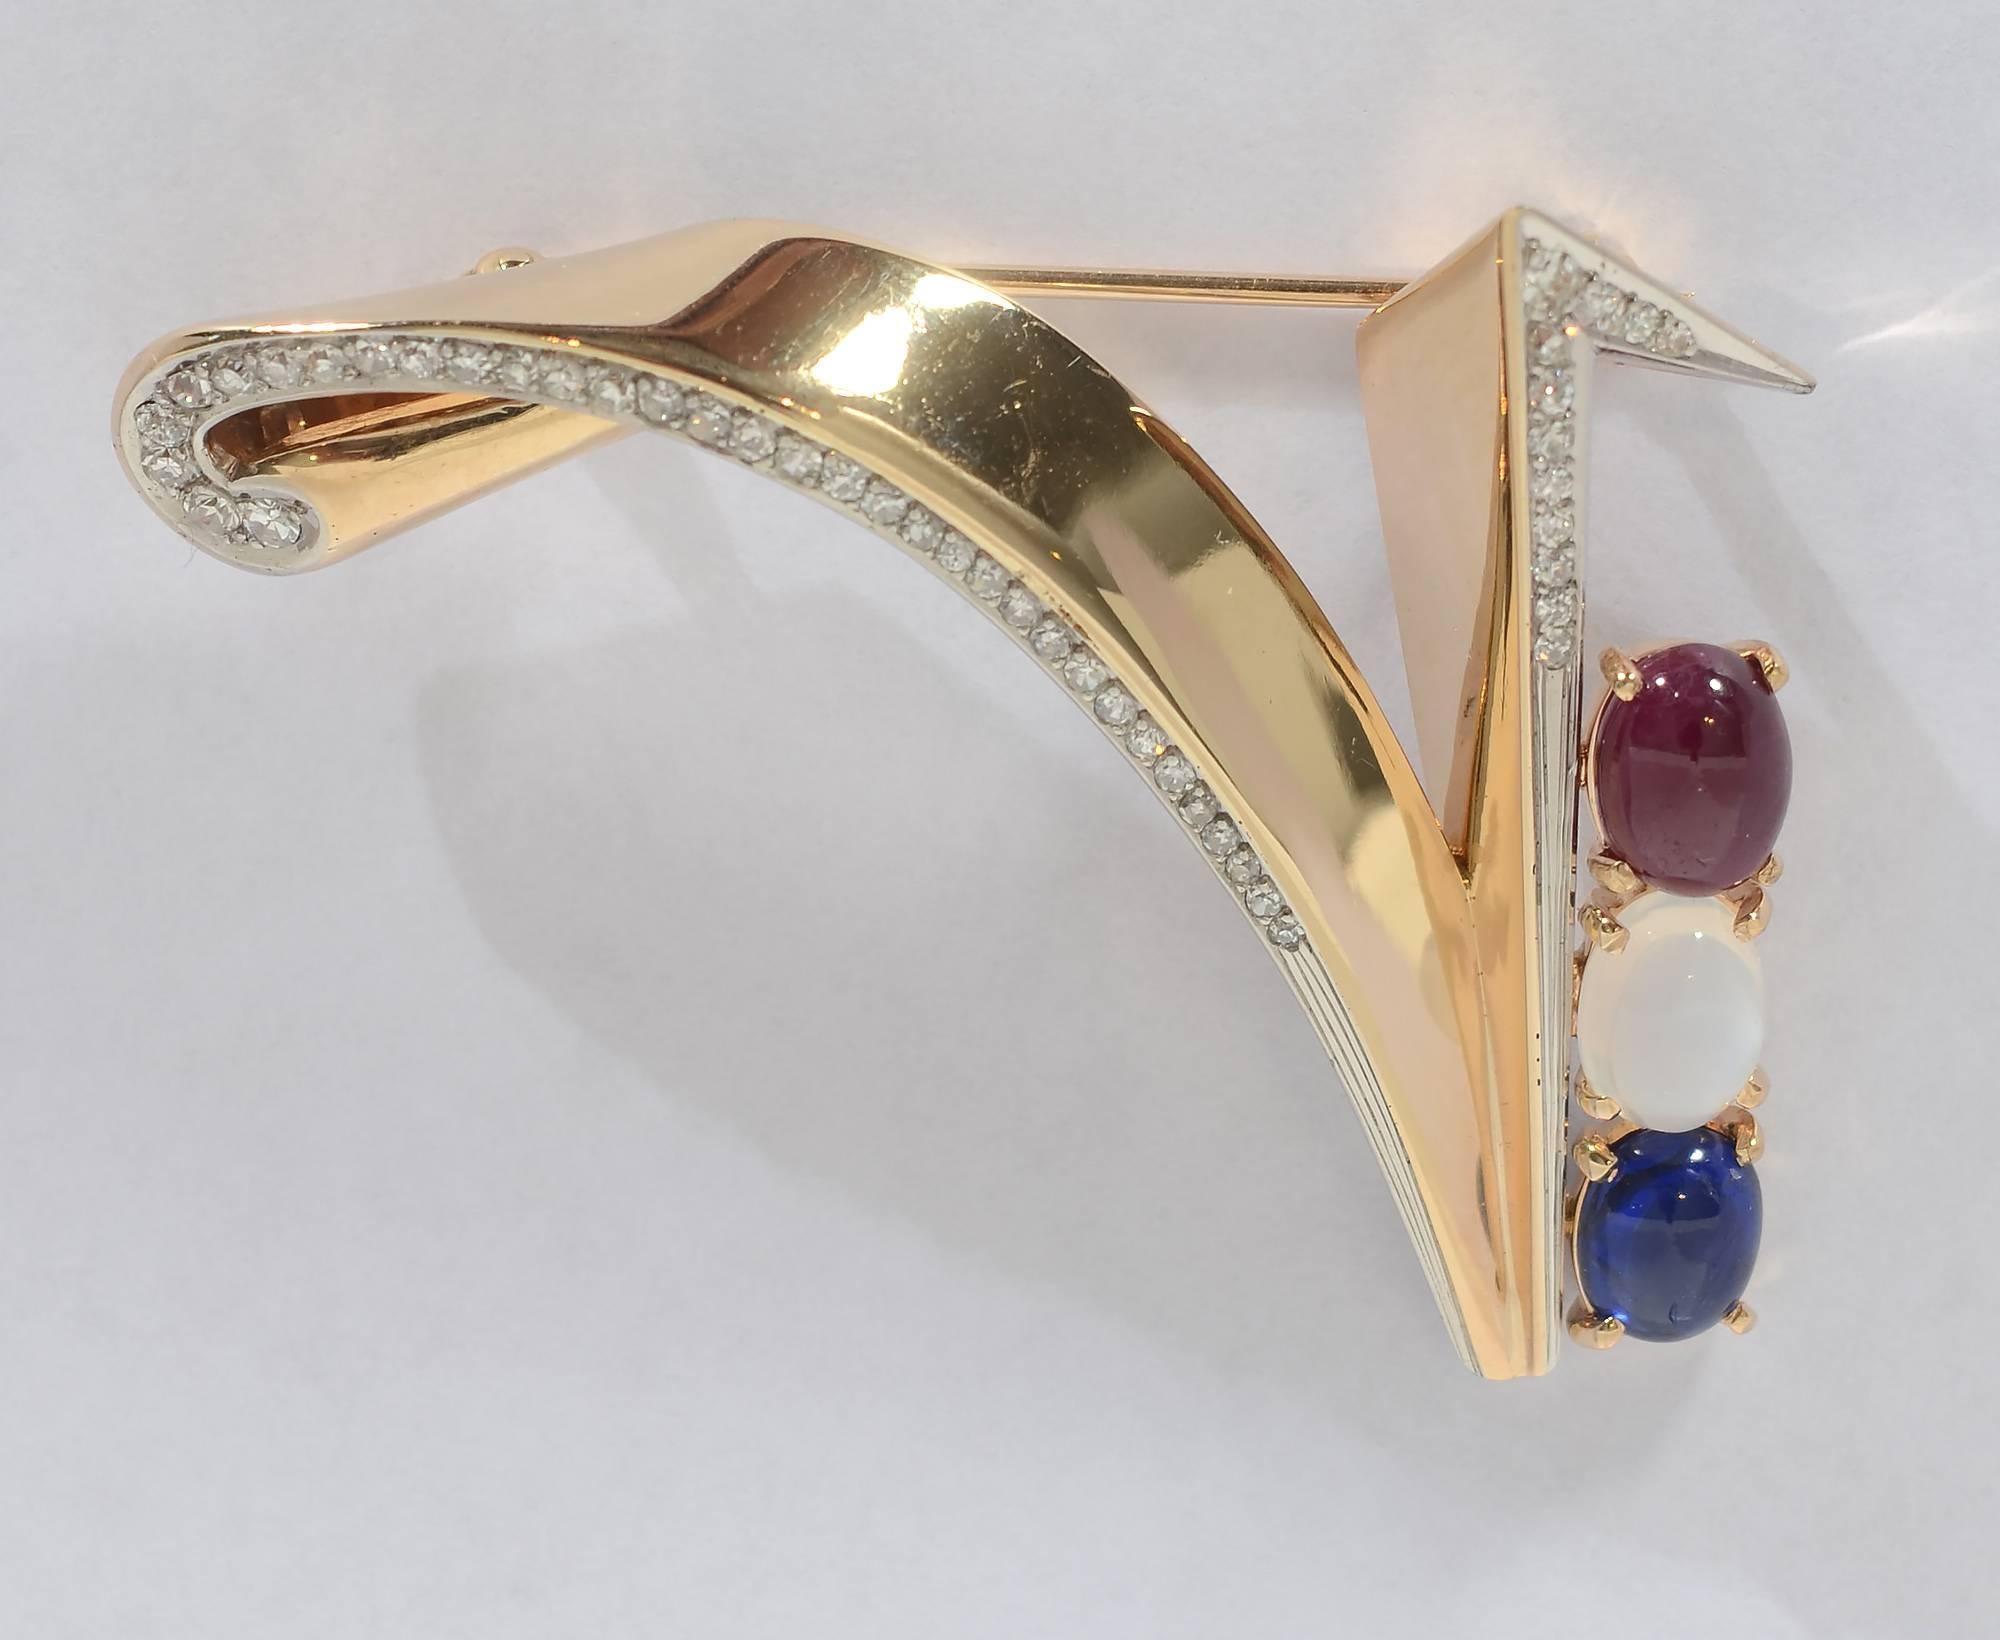 During World War Two, women of all stripes wore their patriotism  with  V for Victory jewelry. This especially graceful example by Mauboussin with Trabert and Hoeffer has the cache and elegance one finds in pieces produced by the union of these two